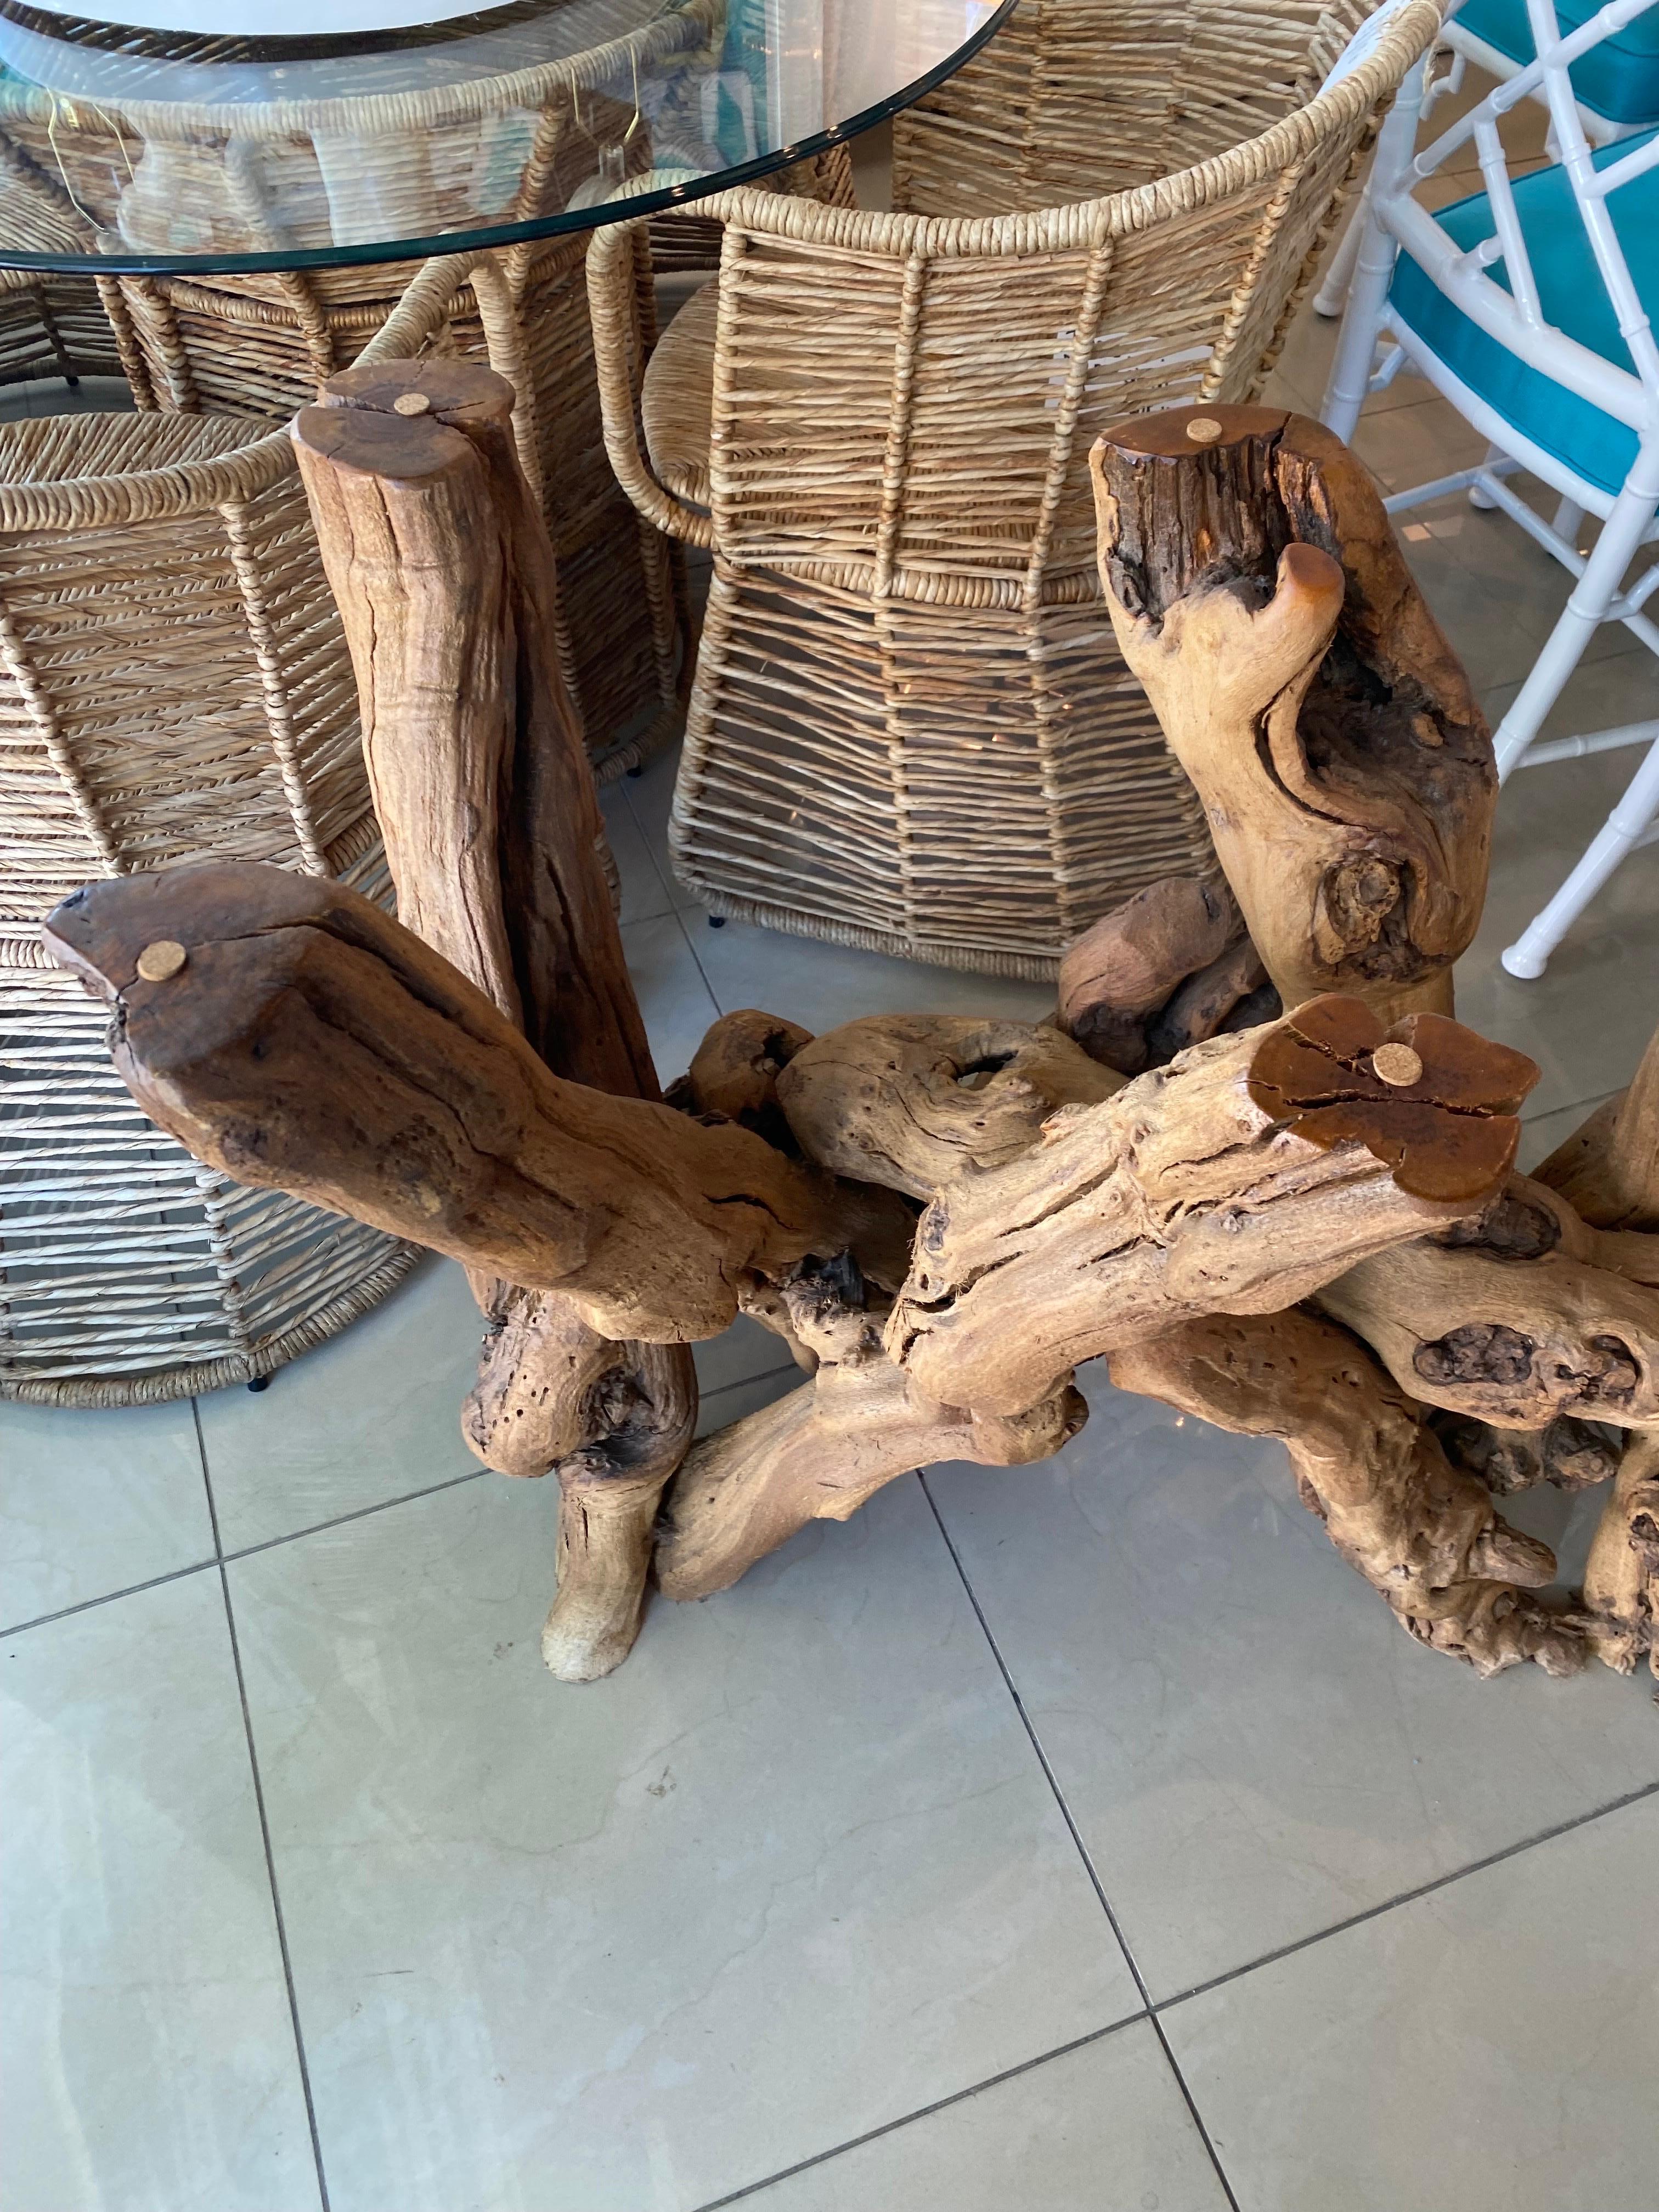 driftwood dining table base